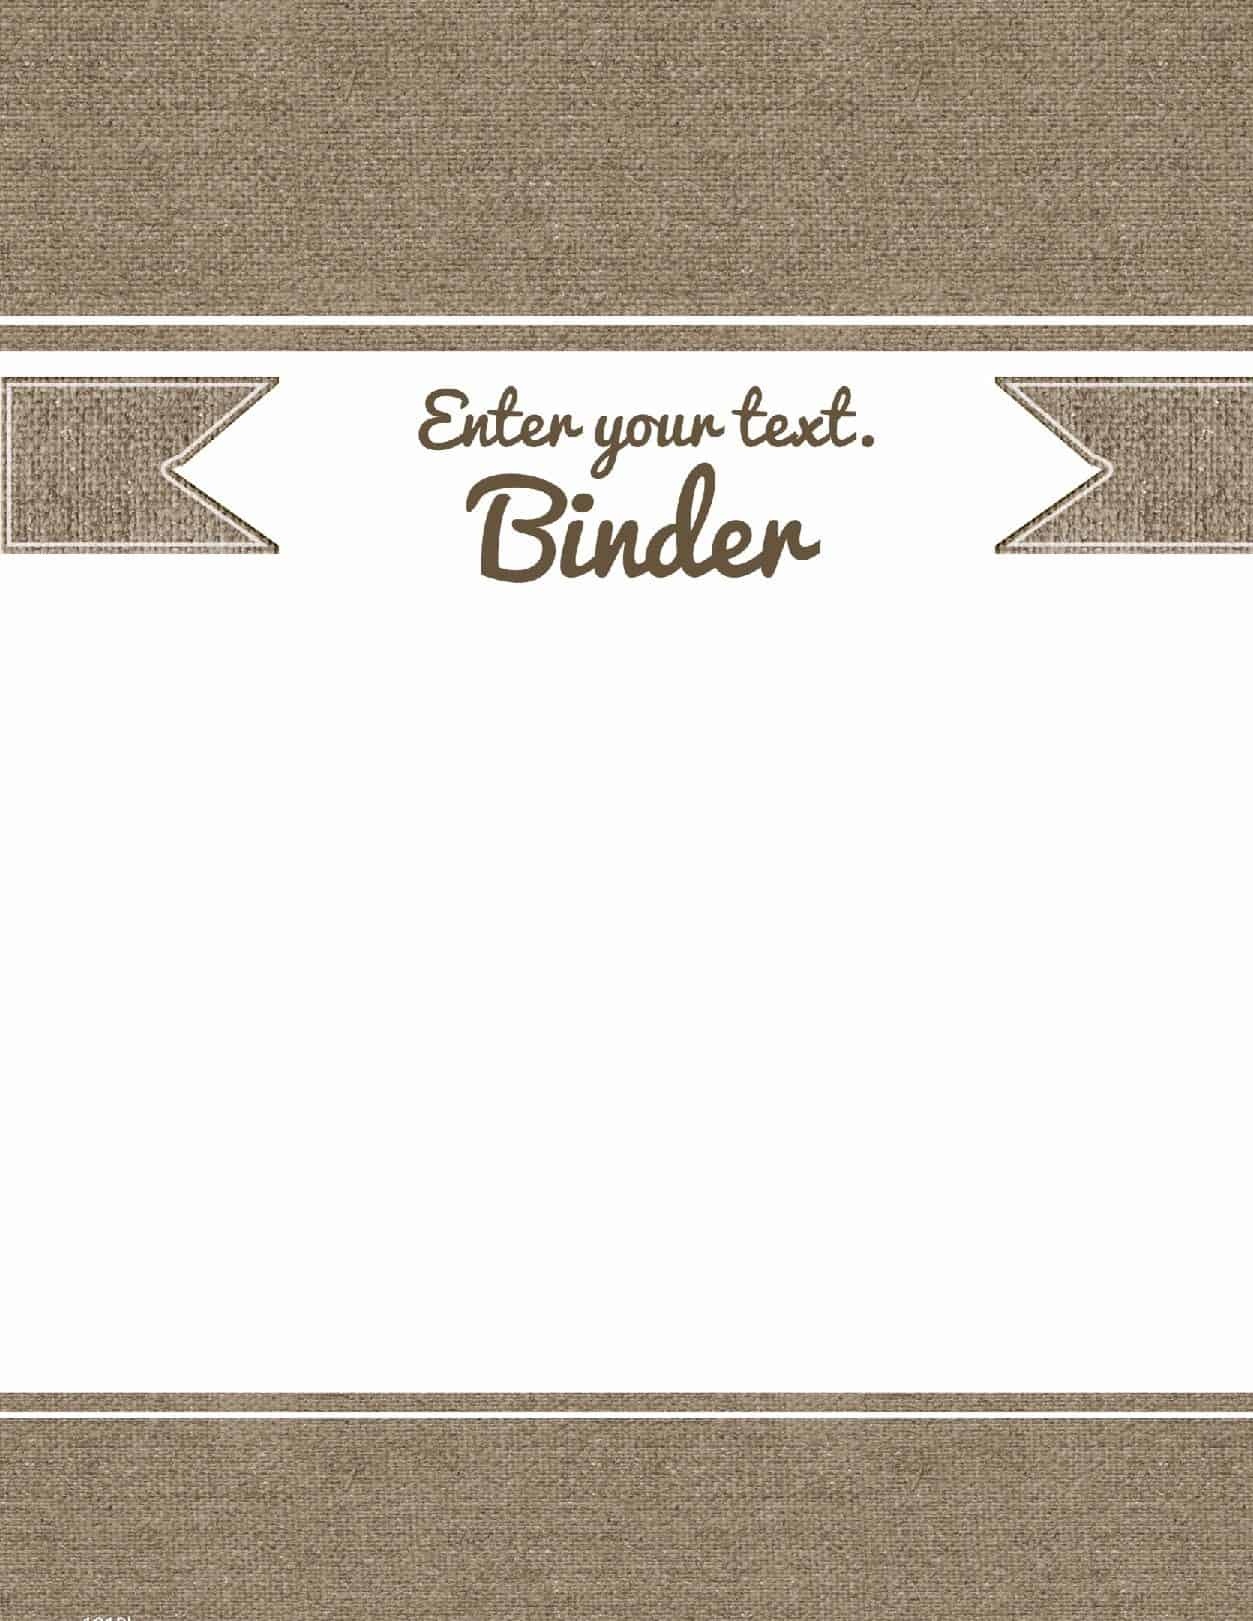 Free Binder Cover Templates | Customize Online &amp;amp; Print At Home | Free! - Free Printable Binder Cover Templates